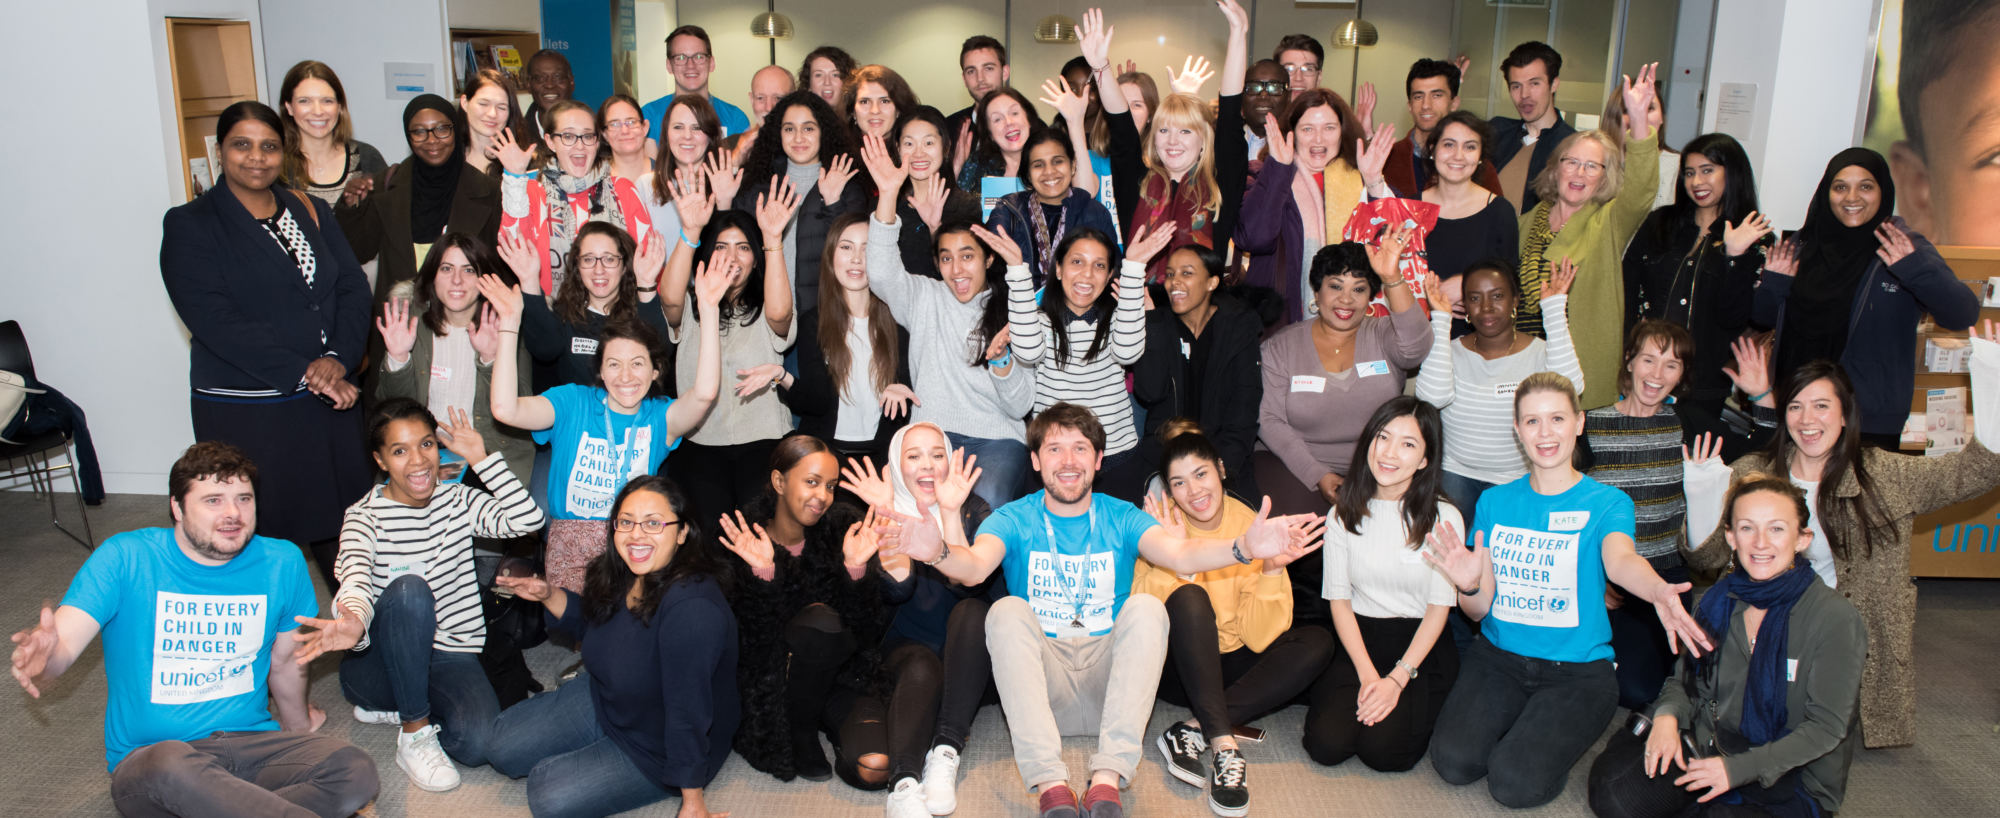 Join us for UNICEF UK campaigner training - Rights Respecting Schools Award